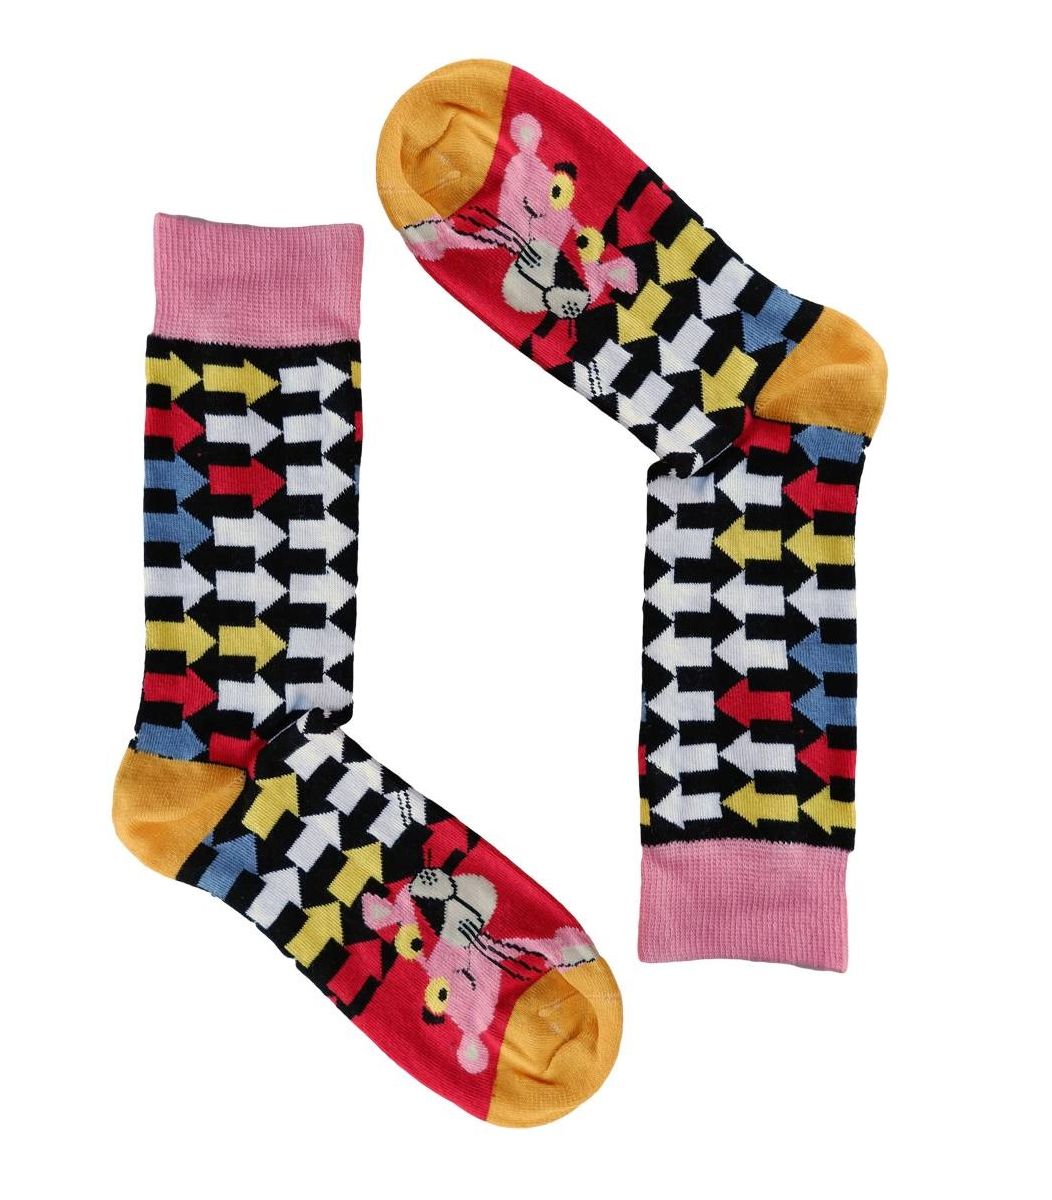 socks colorful Size One Size Color Colorful